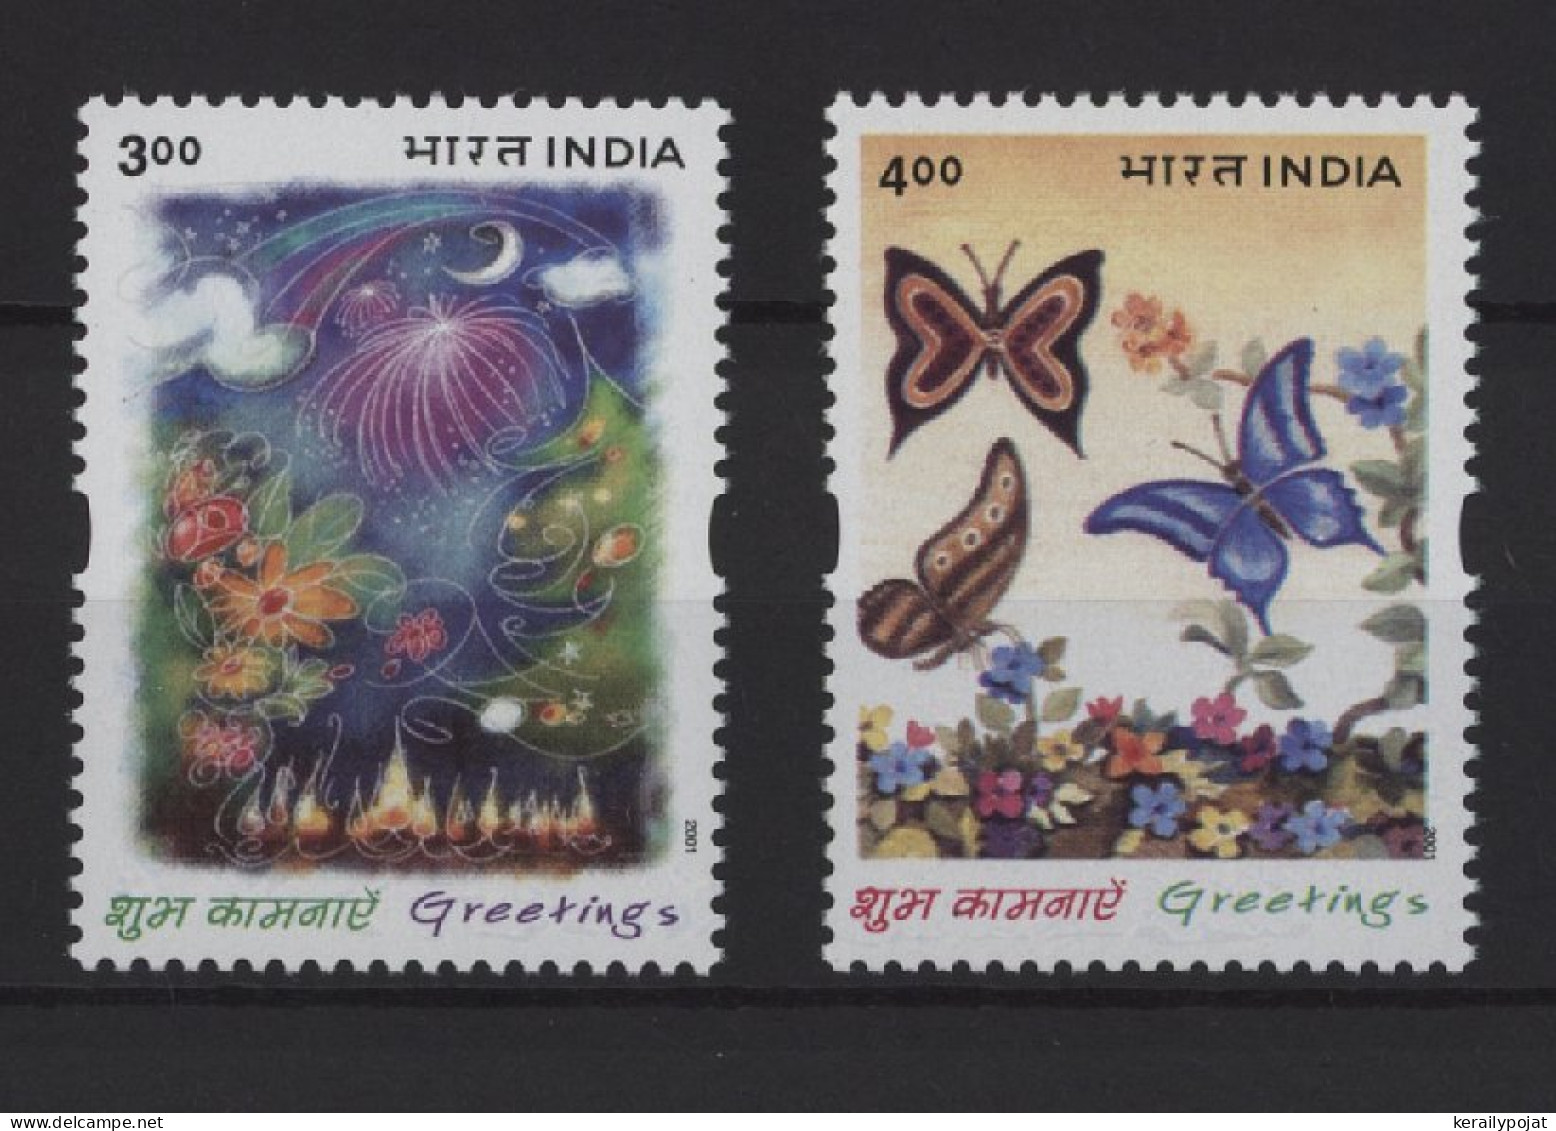 India - 2001 Greeting Stamps MNH__(TH-26891) - Unused Stamps